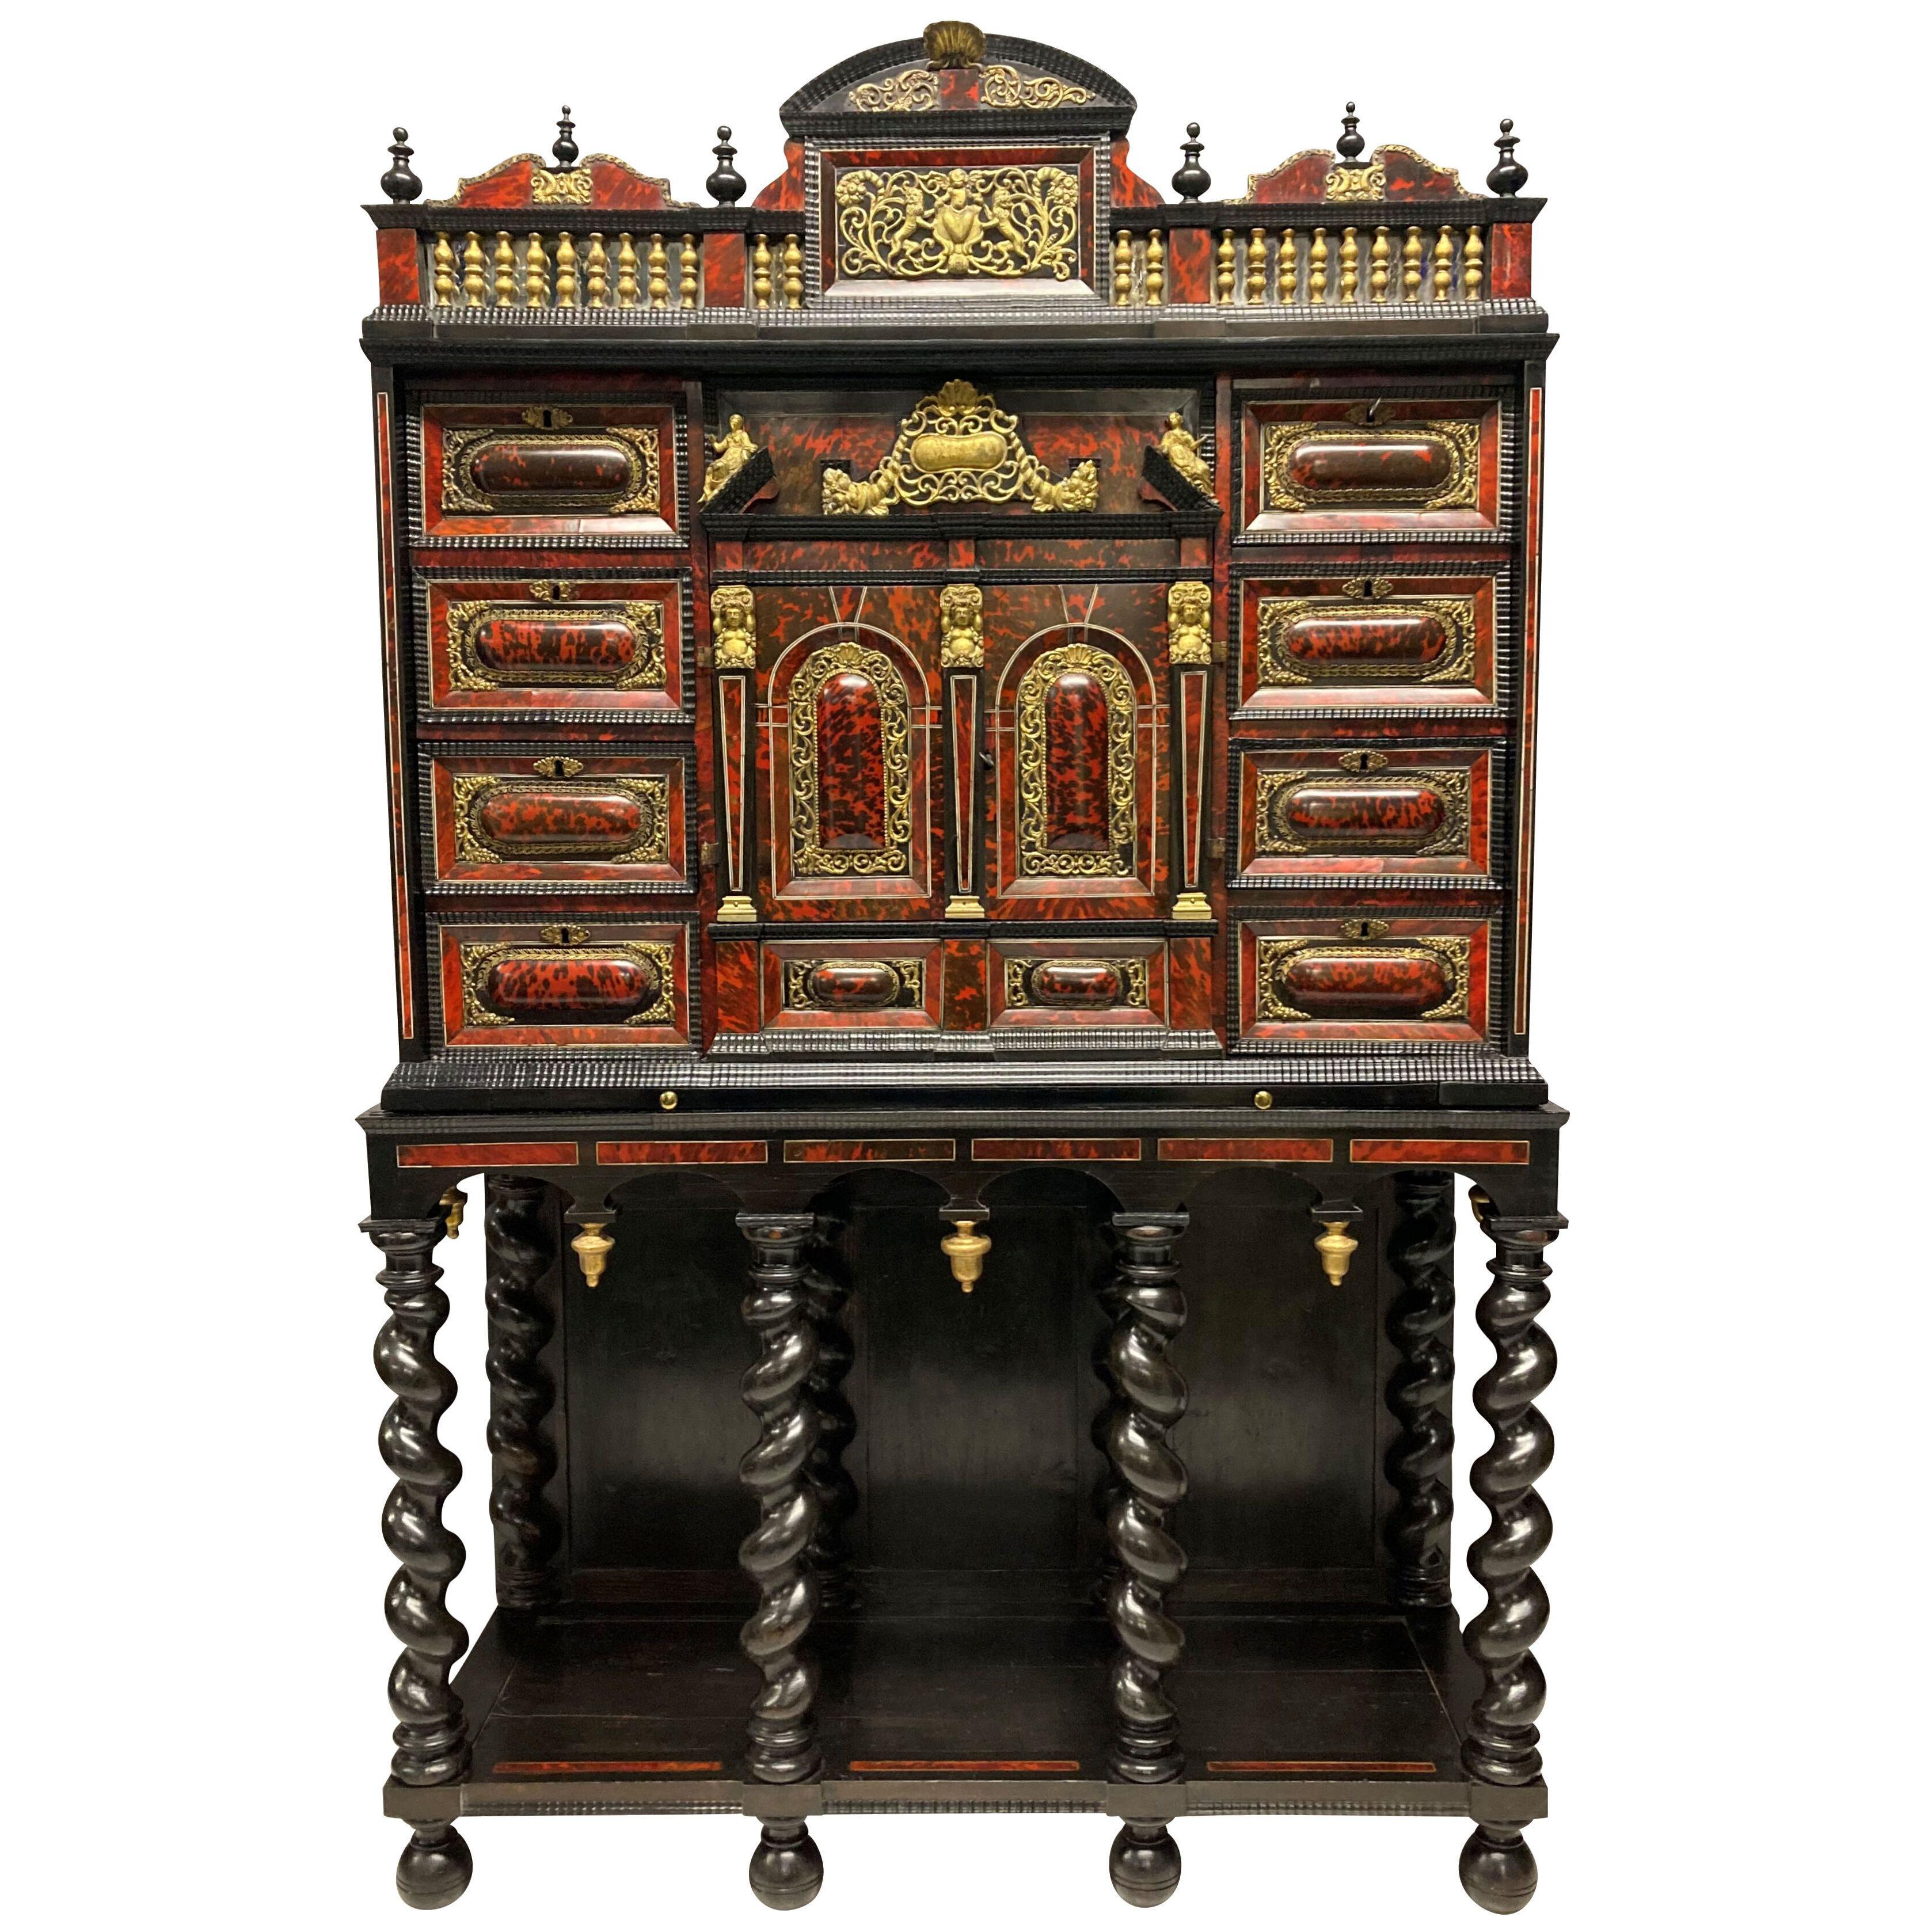 A FINE BAROQUE LATE XVII CENTURY TORTOISESHELL ARCHITECTURAL CABINET ON STAND